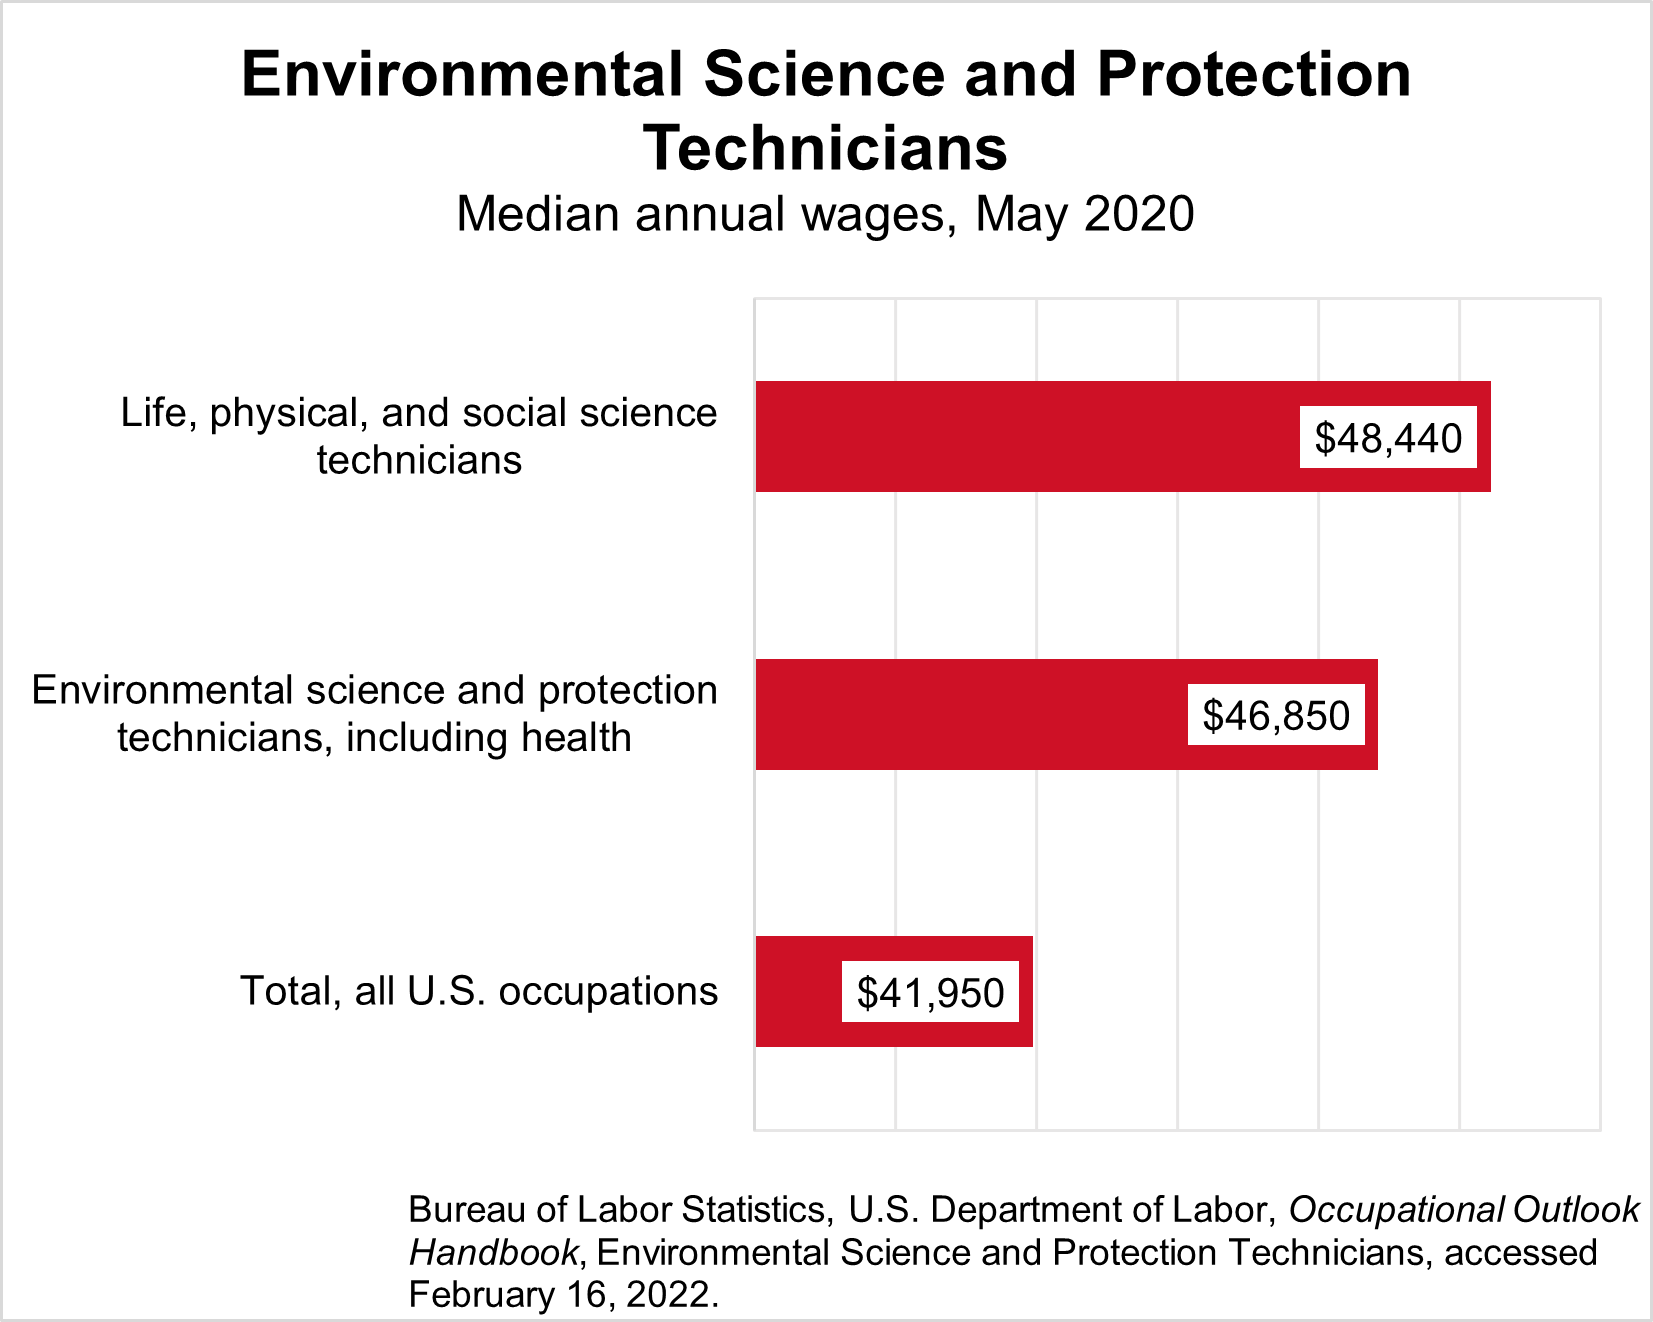 The median annual wages for environmental science and protection technicians and related occupations in May 2020 was: life, physical, and social science technicians ($48,440), environmental science and protection technicians, including health ($46,850). The total for all U.S. occupations was $41,950.  Source: Bureau of Labor Statistics, U.S. Department of Labor, Occupational Outlook Handbook, Environmental Science and Protection Technicians, accessed February 16, 2022.